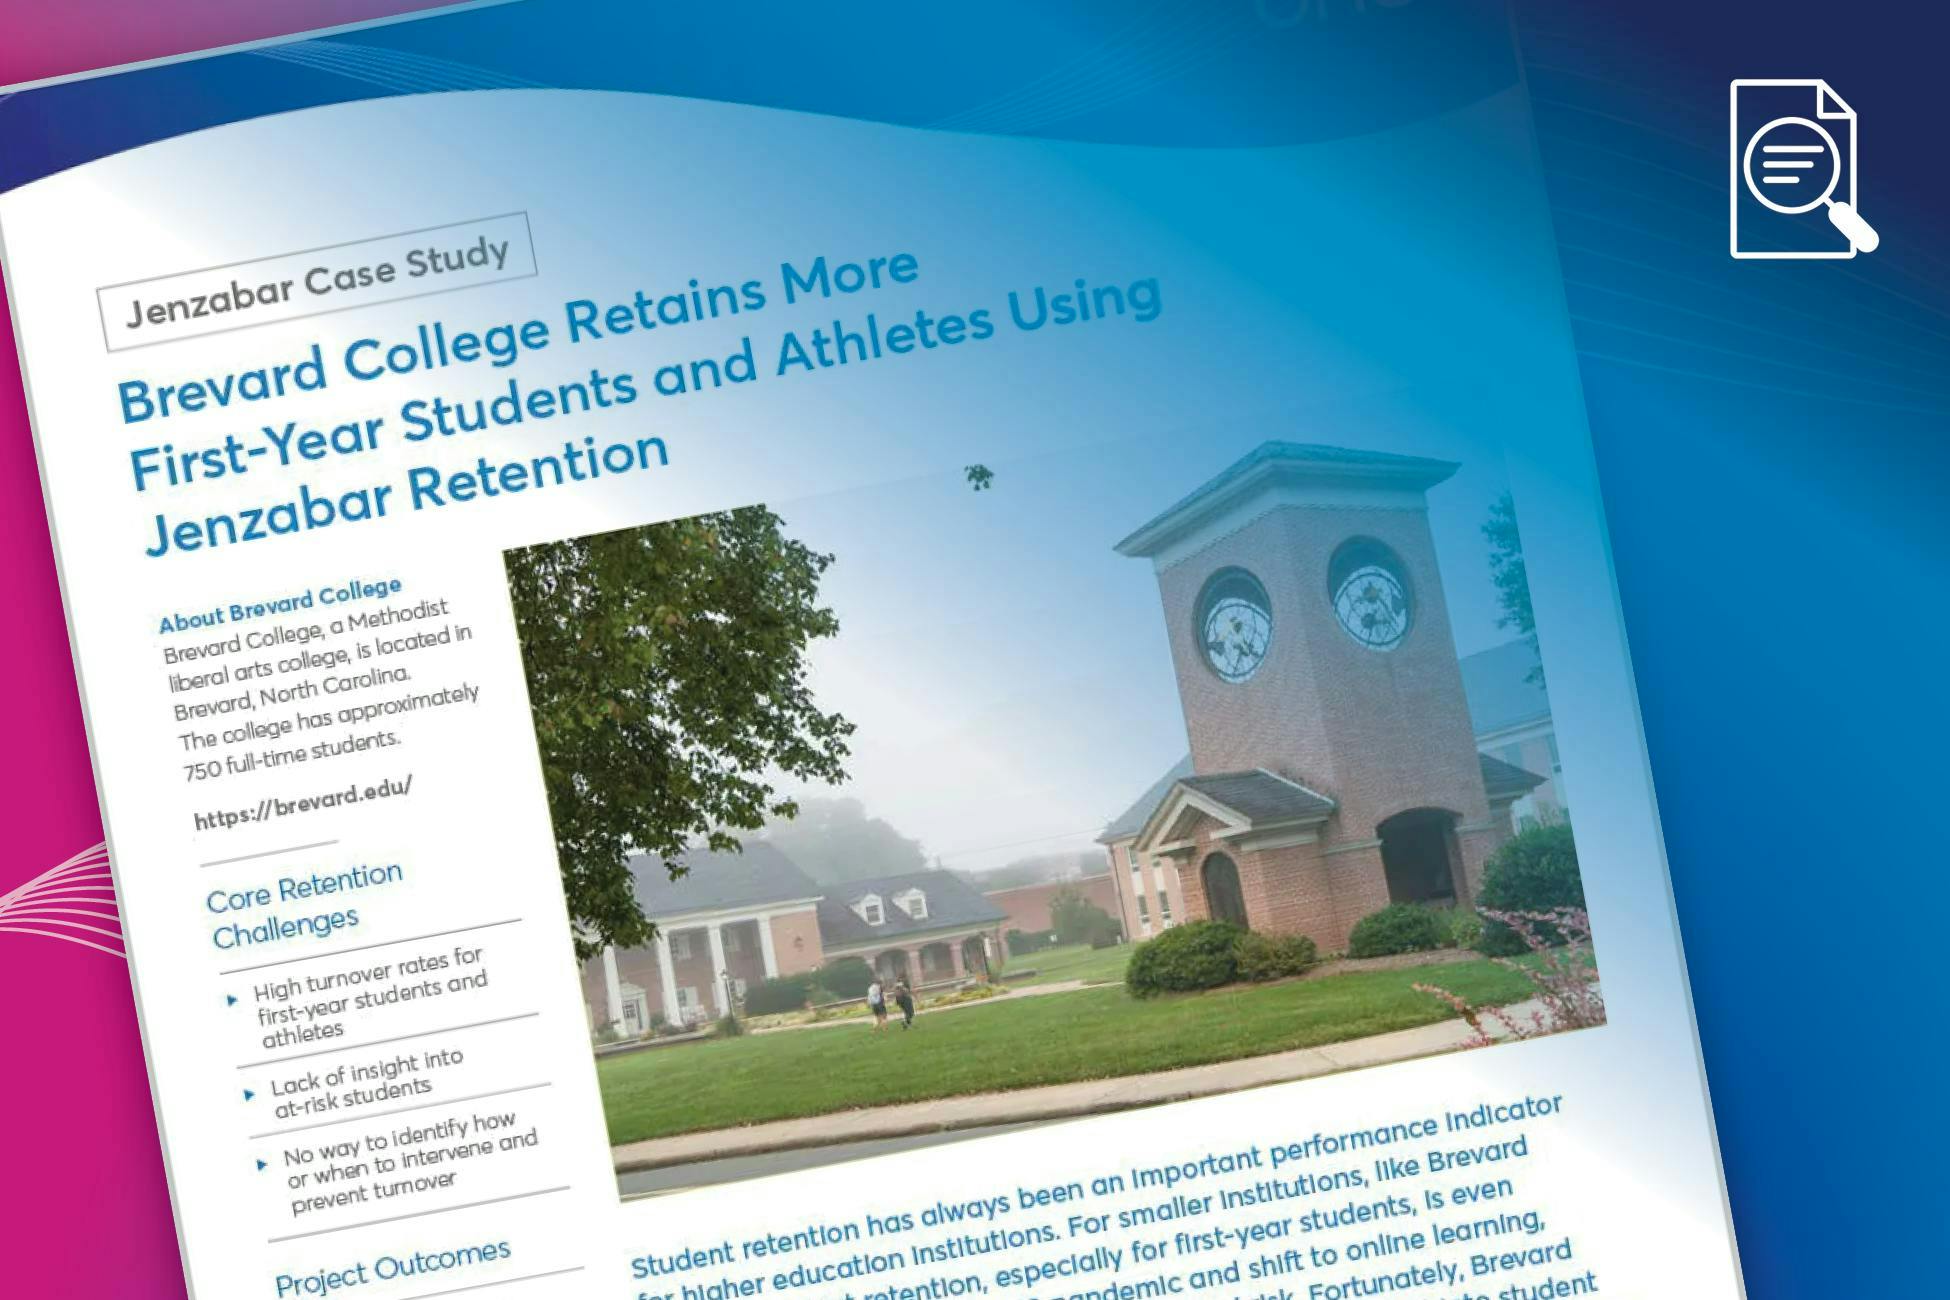 Case Study: Brevard College Retains More First-Year Students and Athletes Using Jenzabar Retention